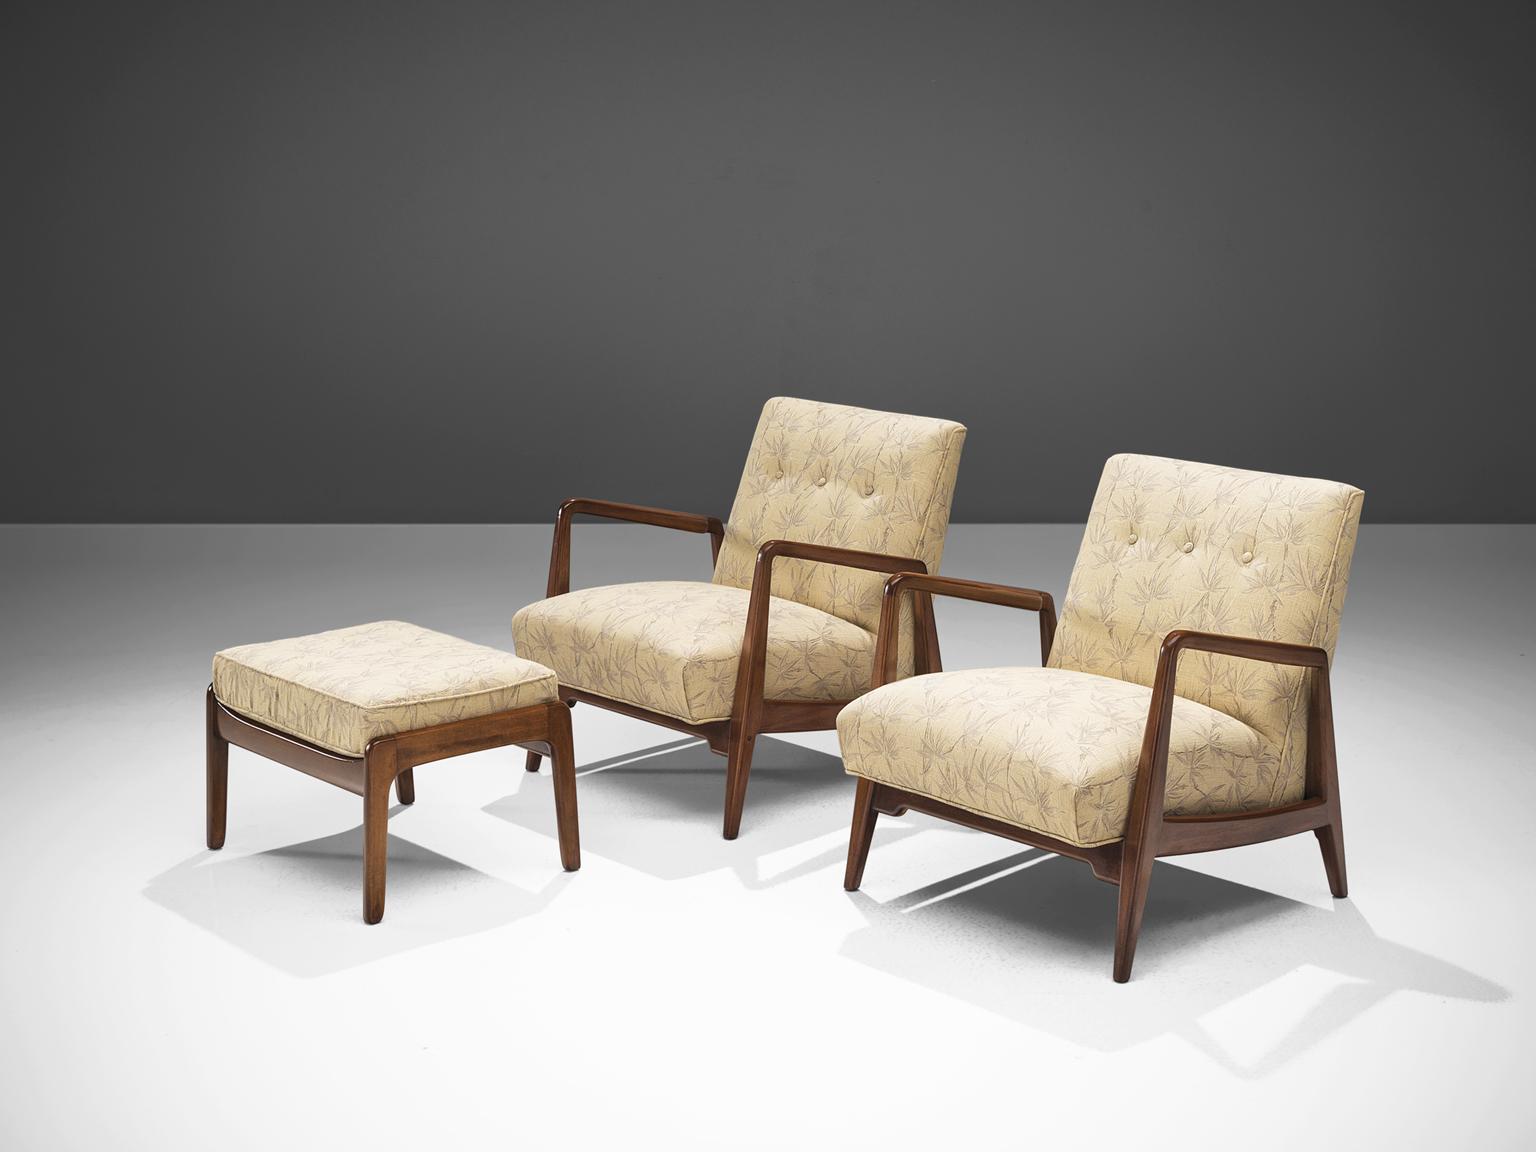 Jens Risom set of two lounge chairs with ottoman, in American walnut and bamboo fabric, United States 1960s. 

This set of two lounge chairs with ottoman in walnut presents an open-arm frame. This lounge chair and ottoman have a walnut frame and